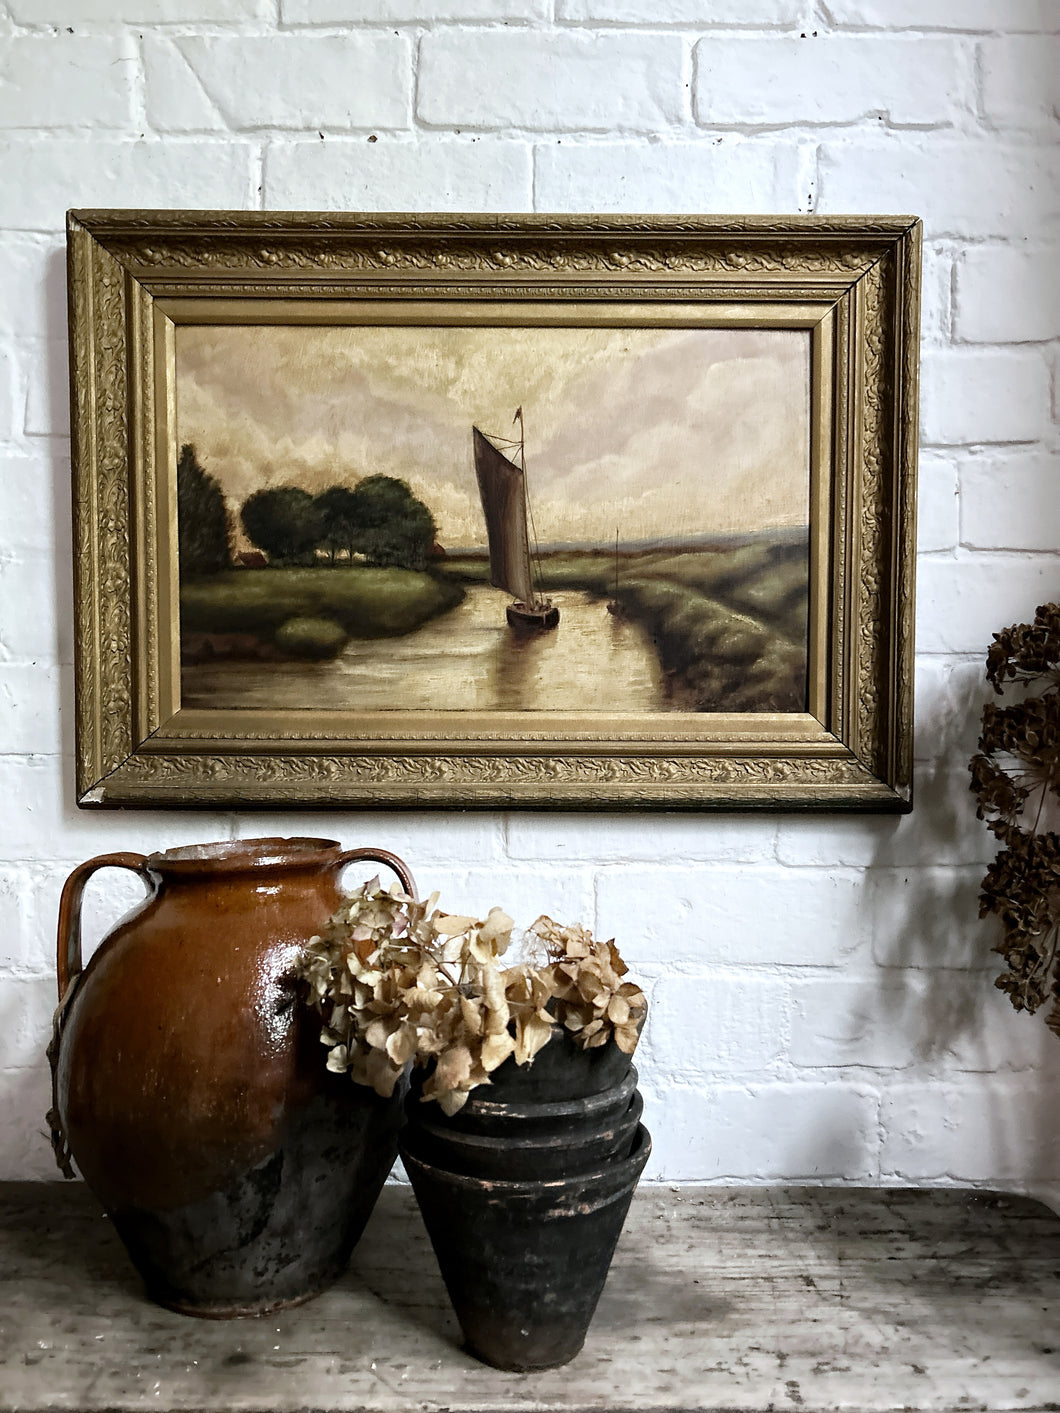 Antique early 20th Century British Modernist oil painting Norfolk Broads boats